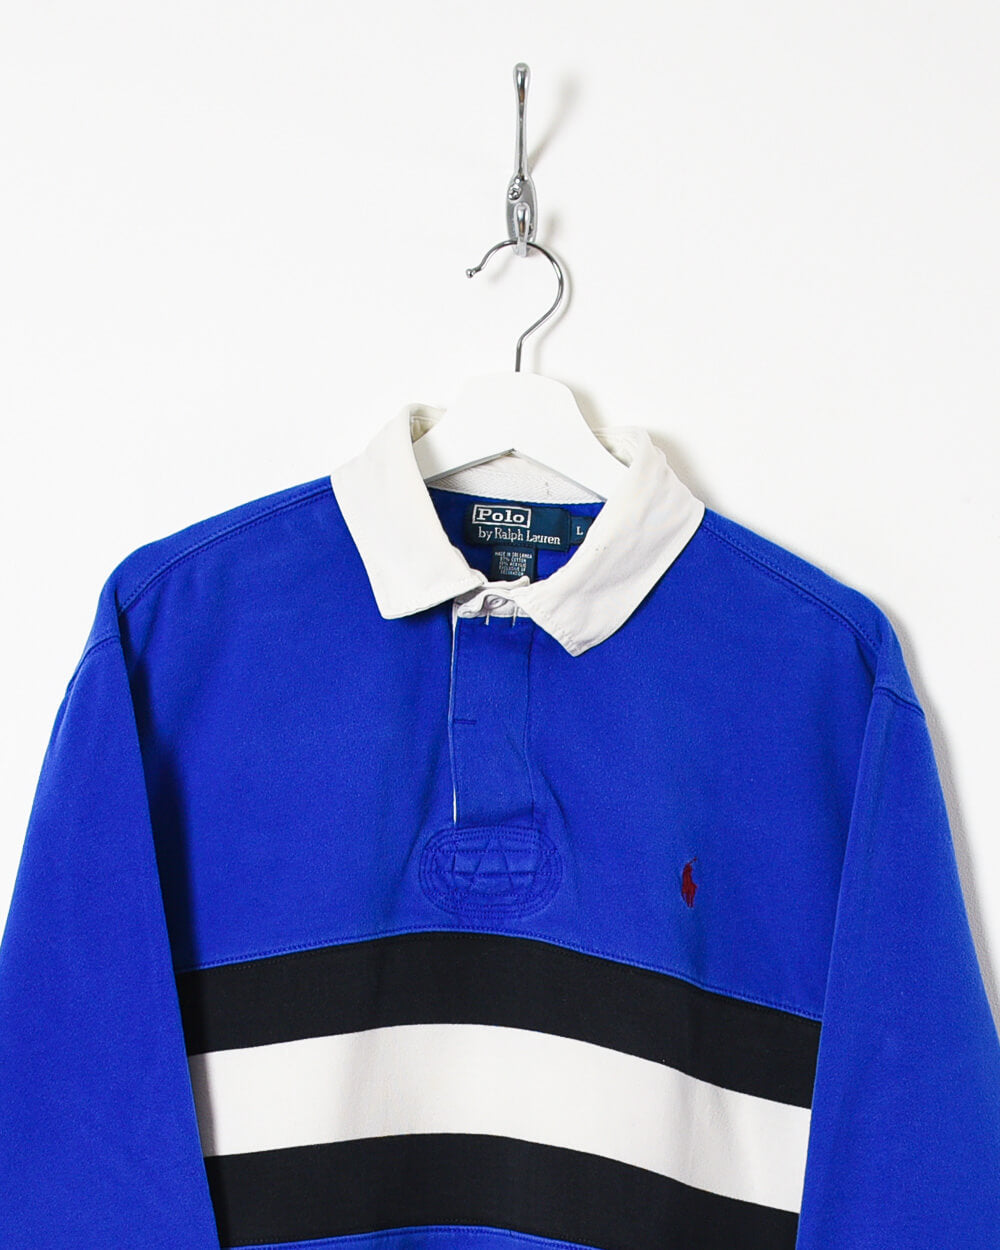 Ralph Lauren Rugby Shirt - X-Large - Domno Vintage 90s, 80s, 00s Retro and Vintage Clothing 